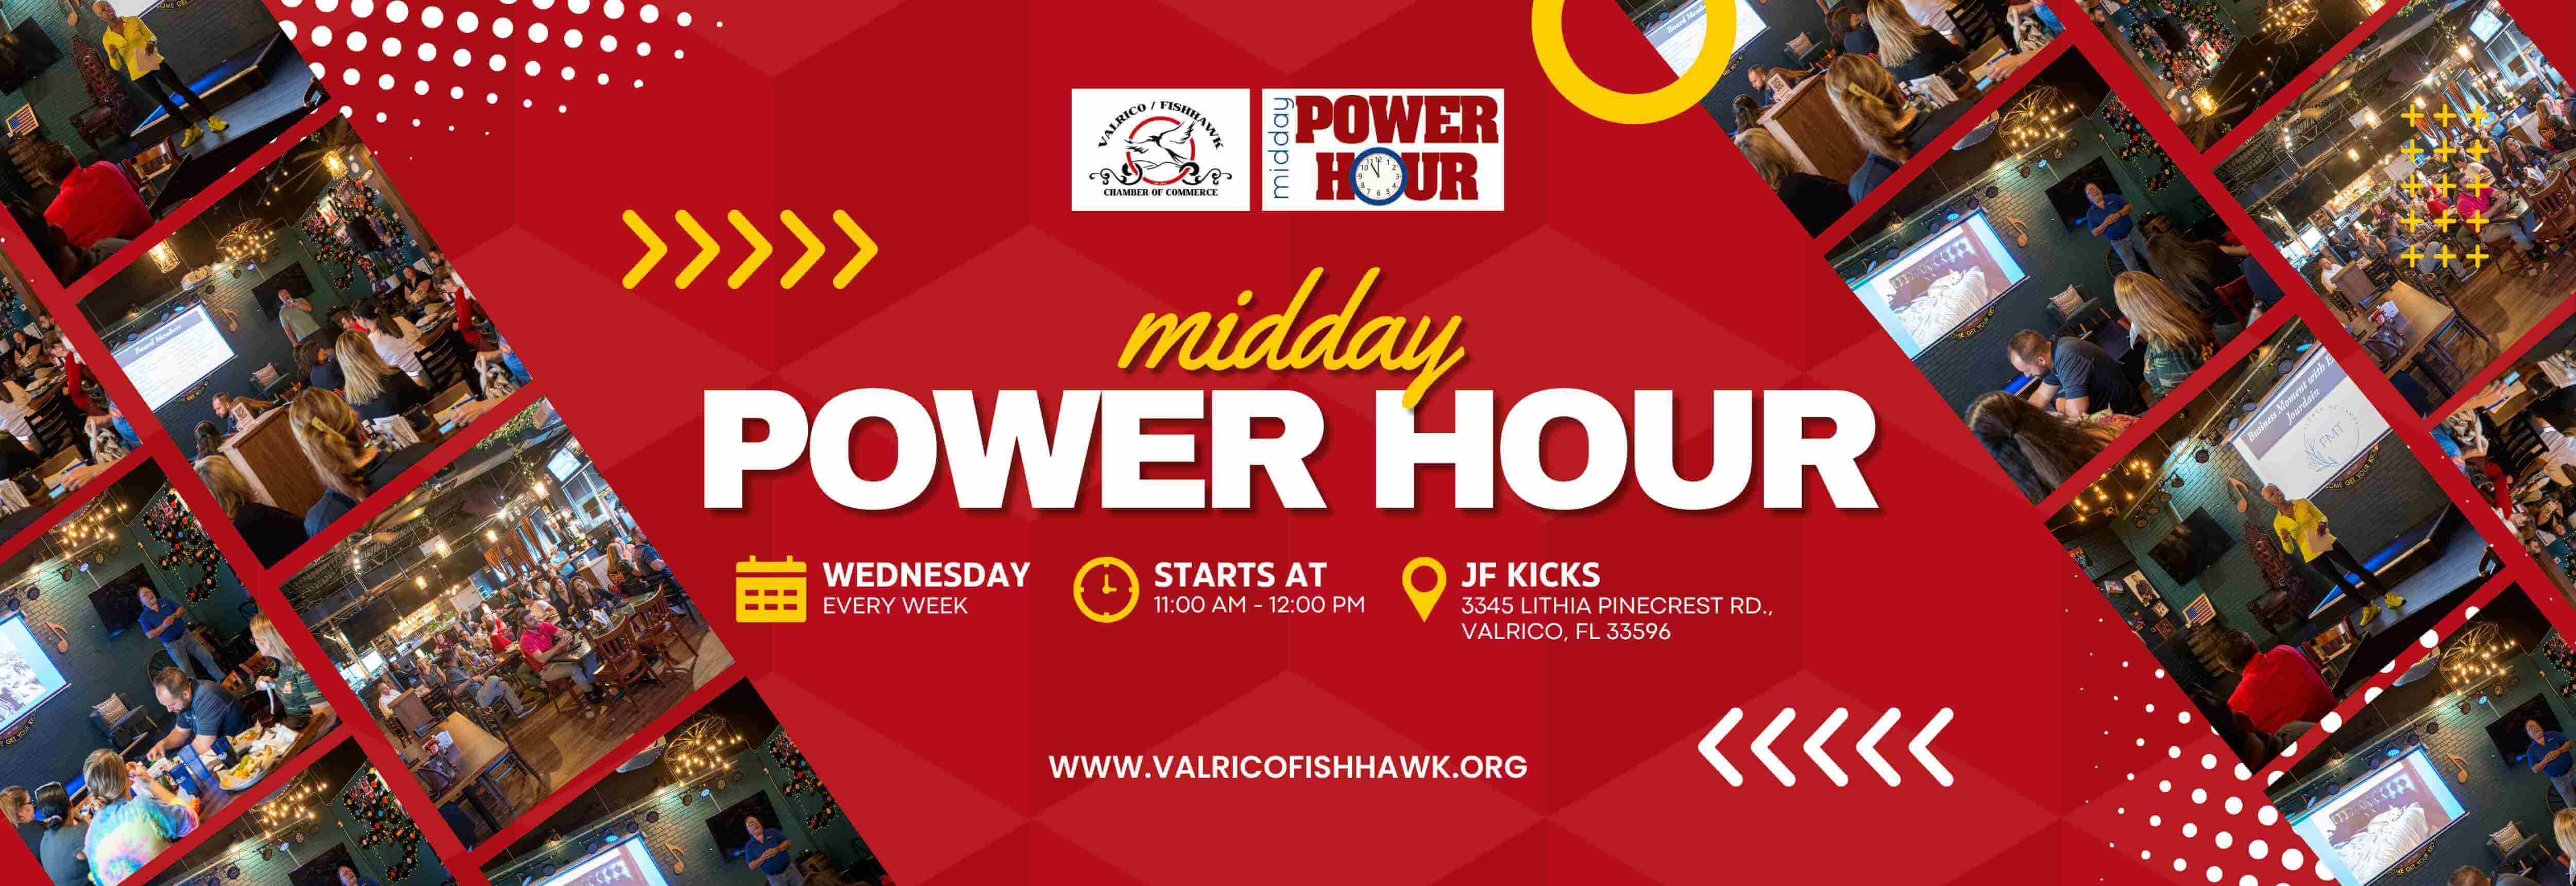 vfcc-midday-power-hour-homepage-banner